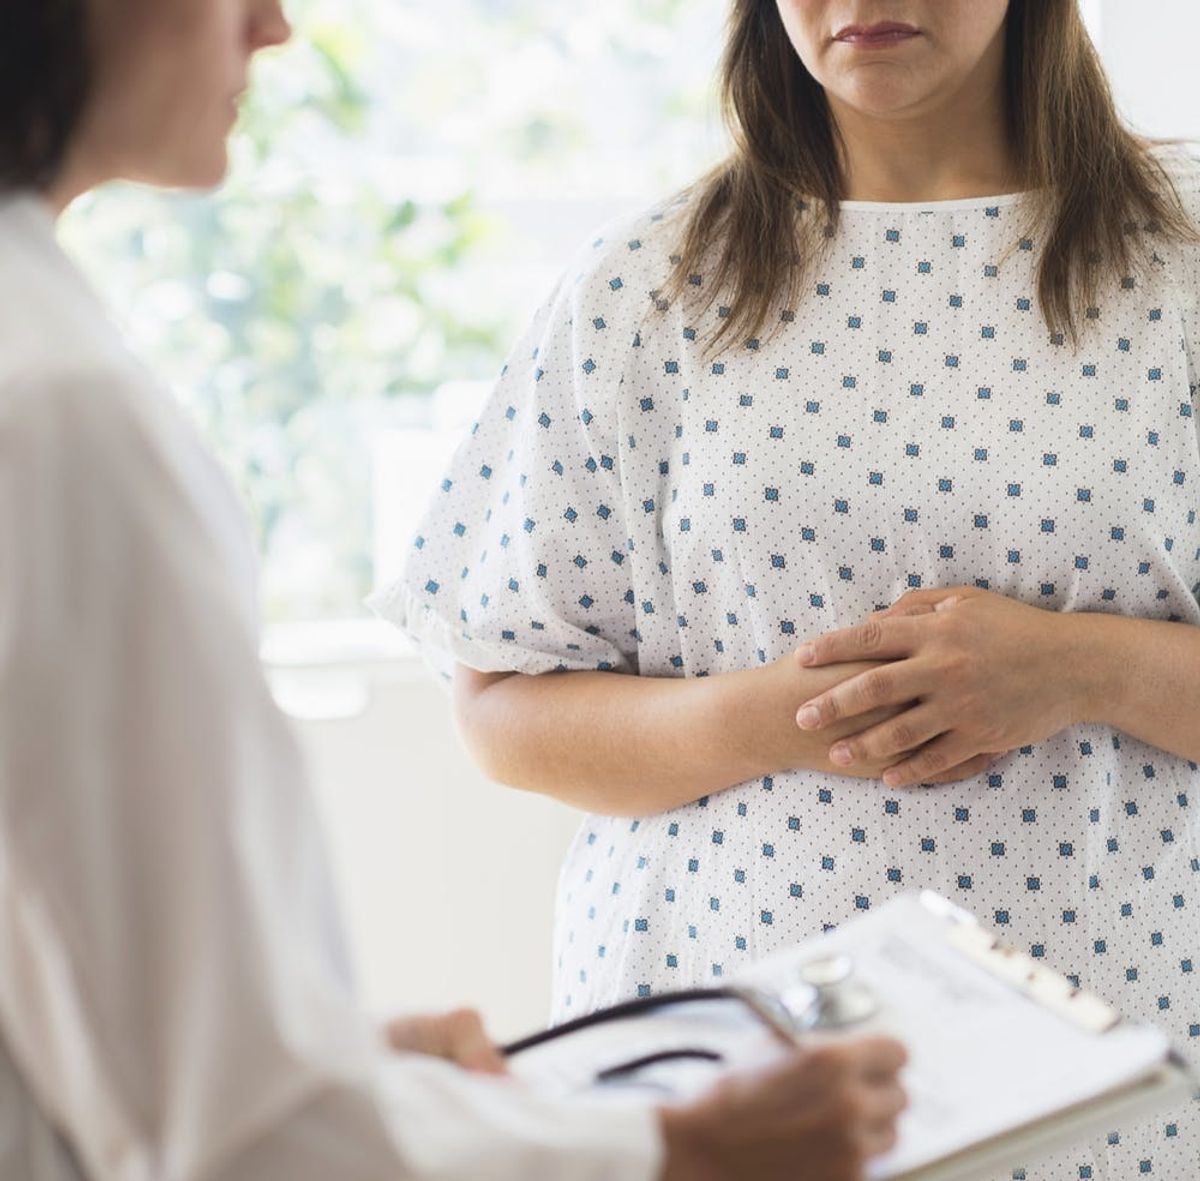 People Are Getting Body-Shamed at the Doctor’s and the Effects Are Terrifying